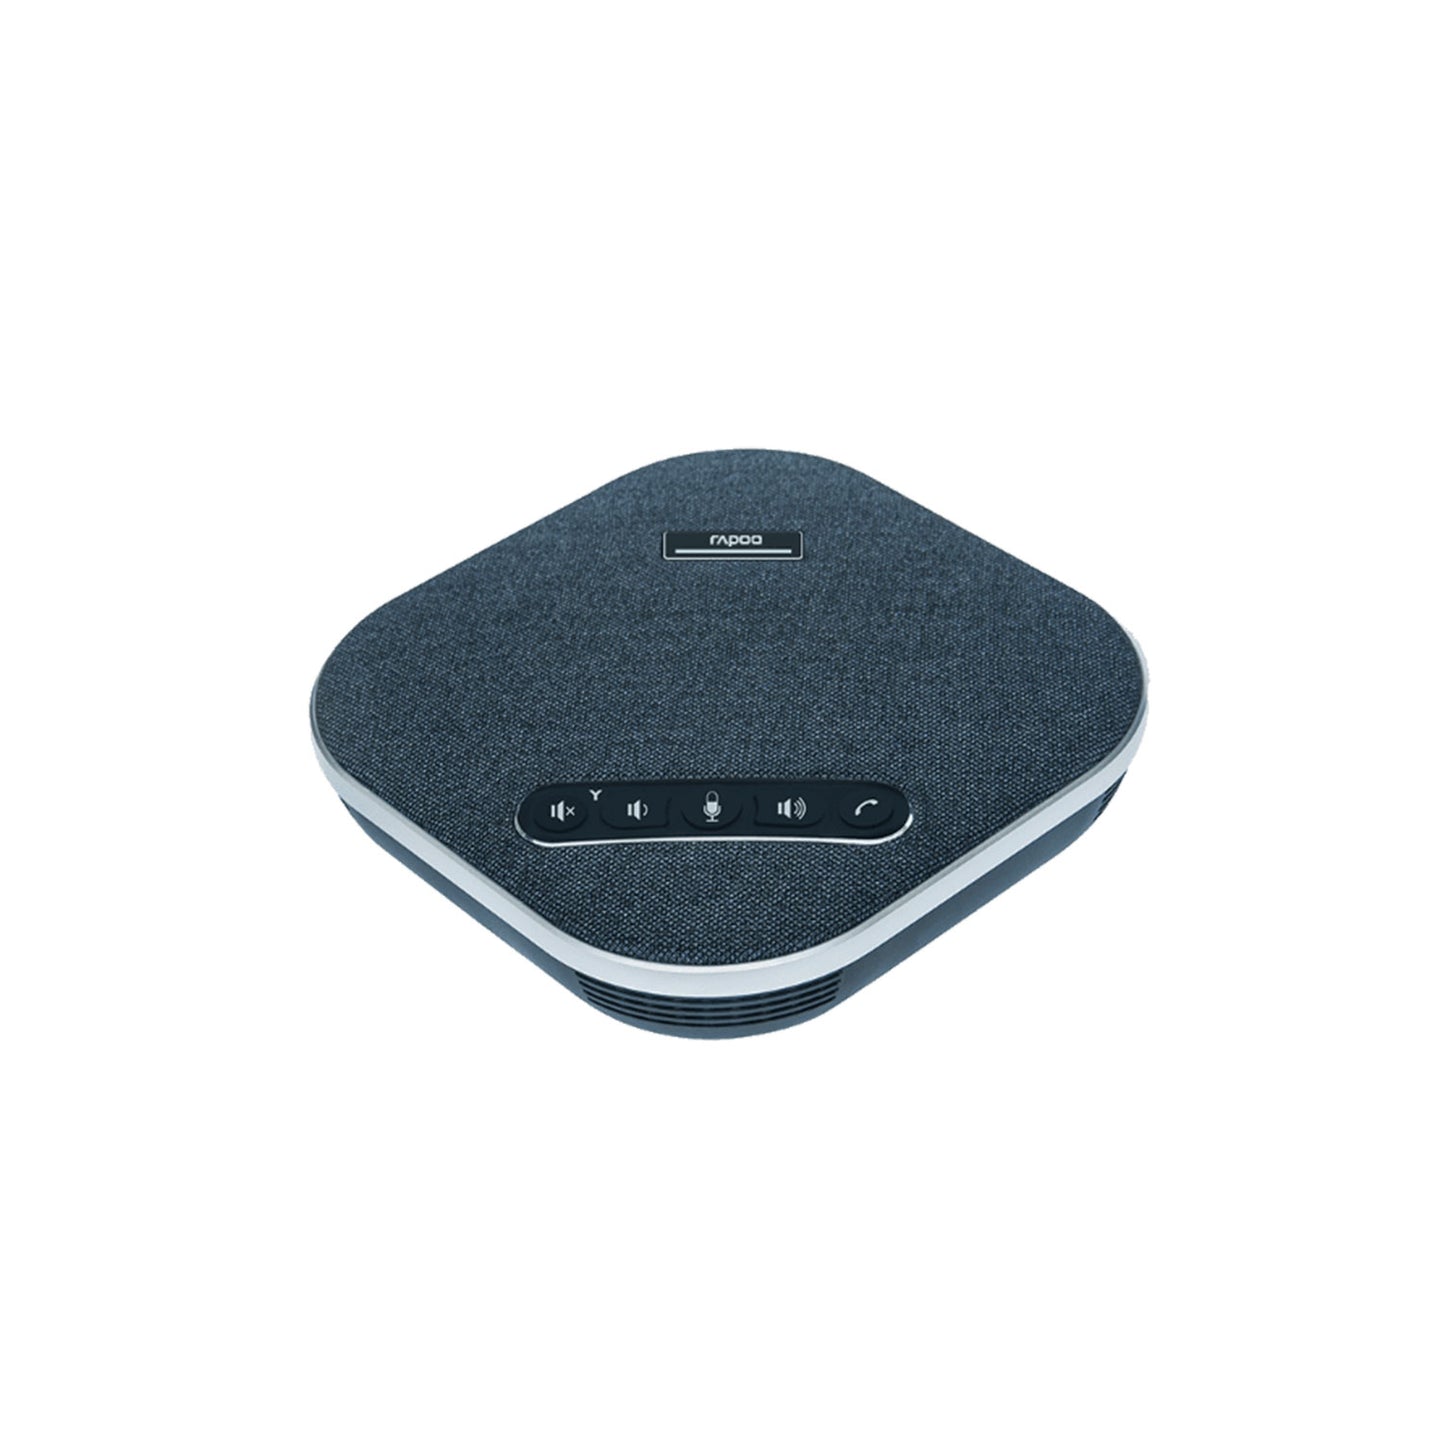 Rapoo CM600 USB Omnidirectional SpeakerPhone For Conference Room and Meeting Room, 5-8M 360 degrees pickup radios for Zoom/Skype/Teams, Conferencing and Video Calls